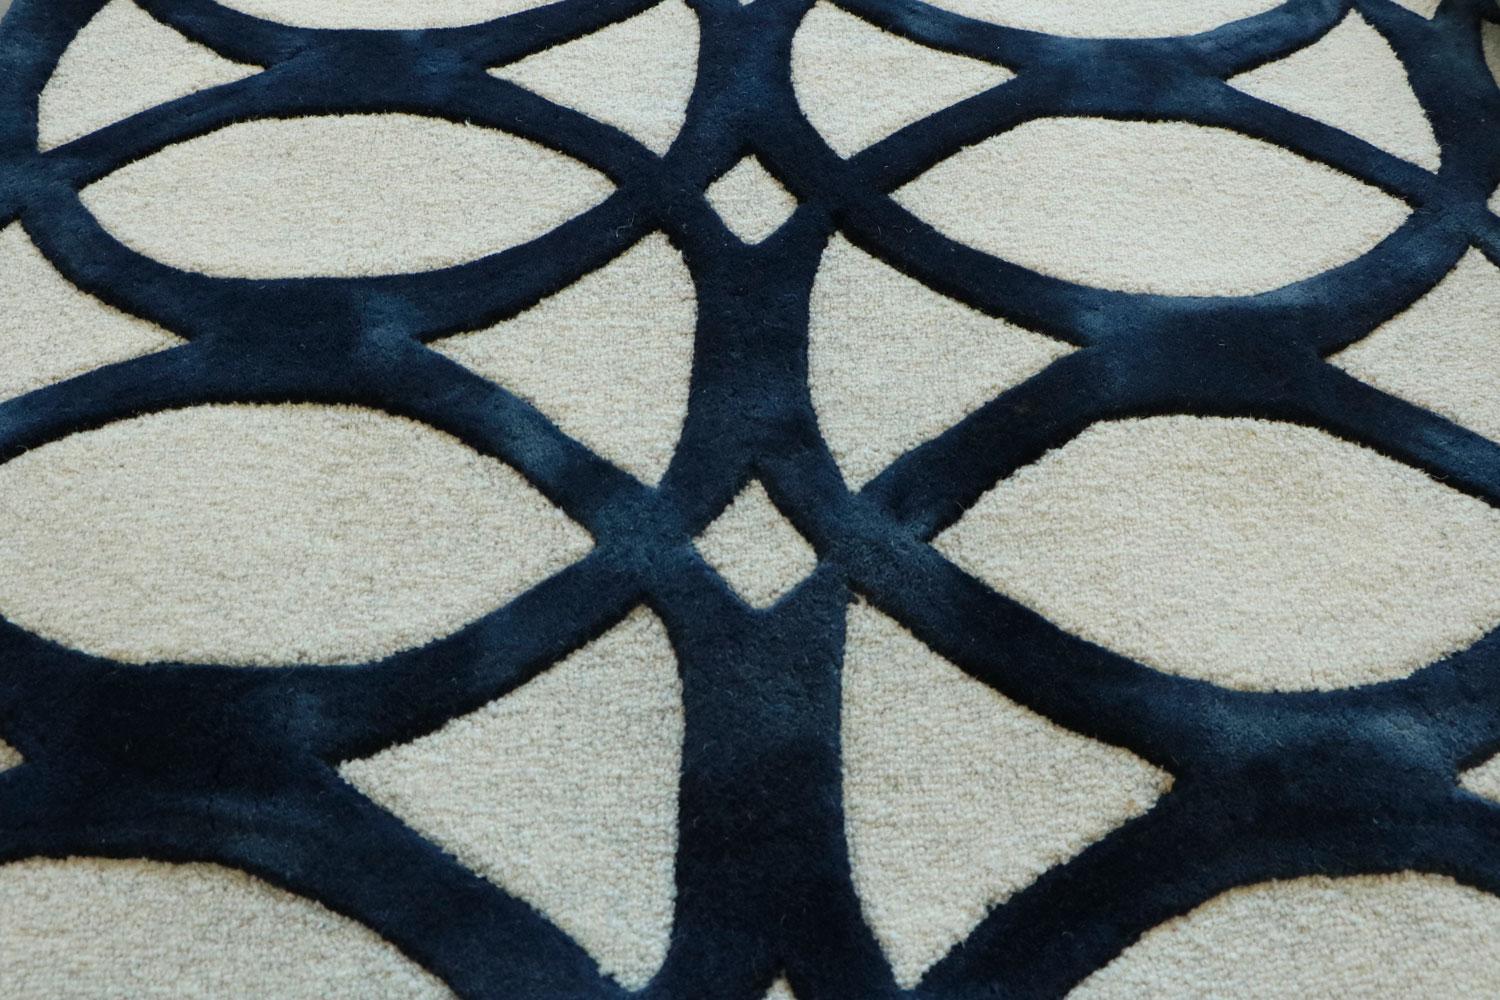 Floating blue by Italian contemporary rug company G.T.DESIGN is created through an updated tie and dye technique and produced in high quality New Zealand wool.
The geometrical pattern or interlocking circles, designed by G.T.DESIGN’s creative